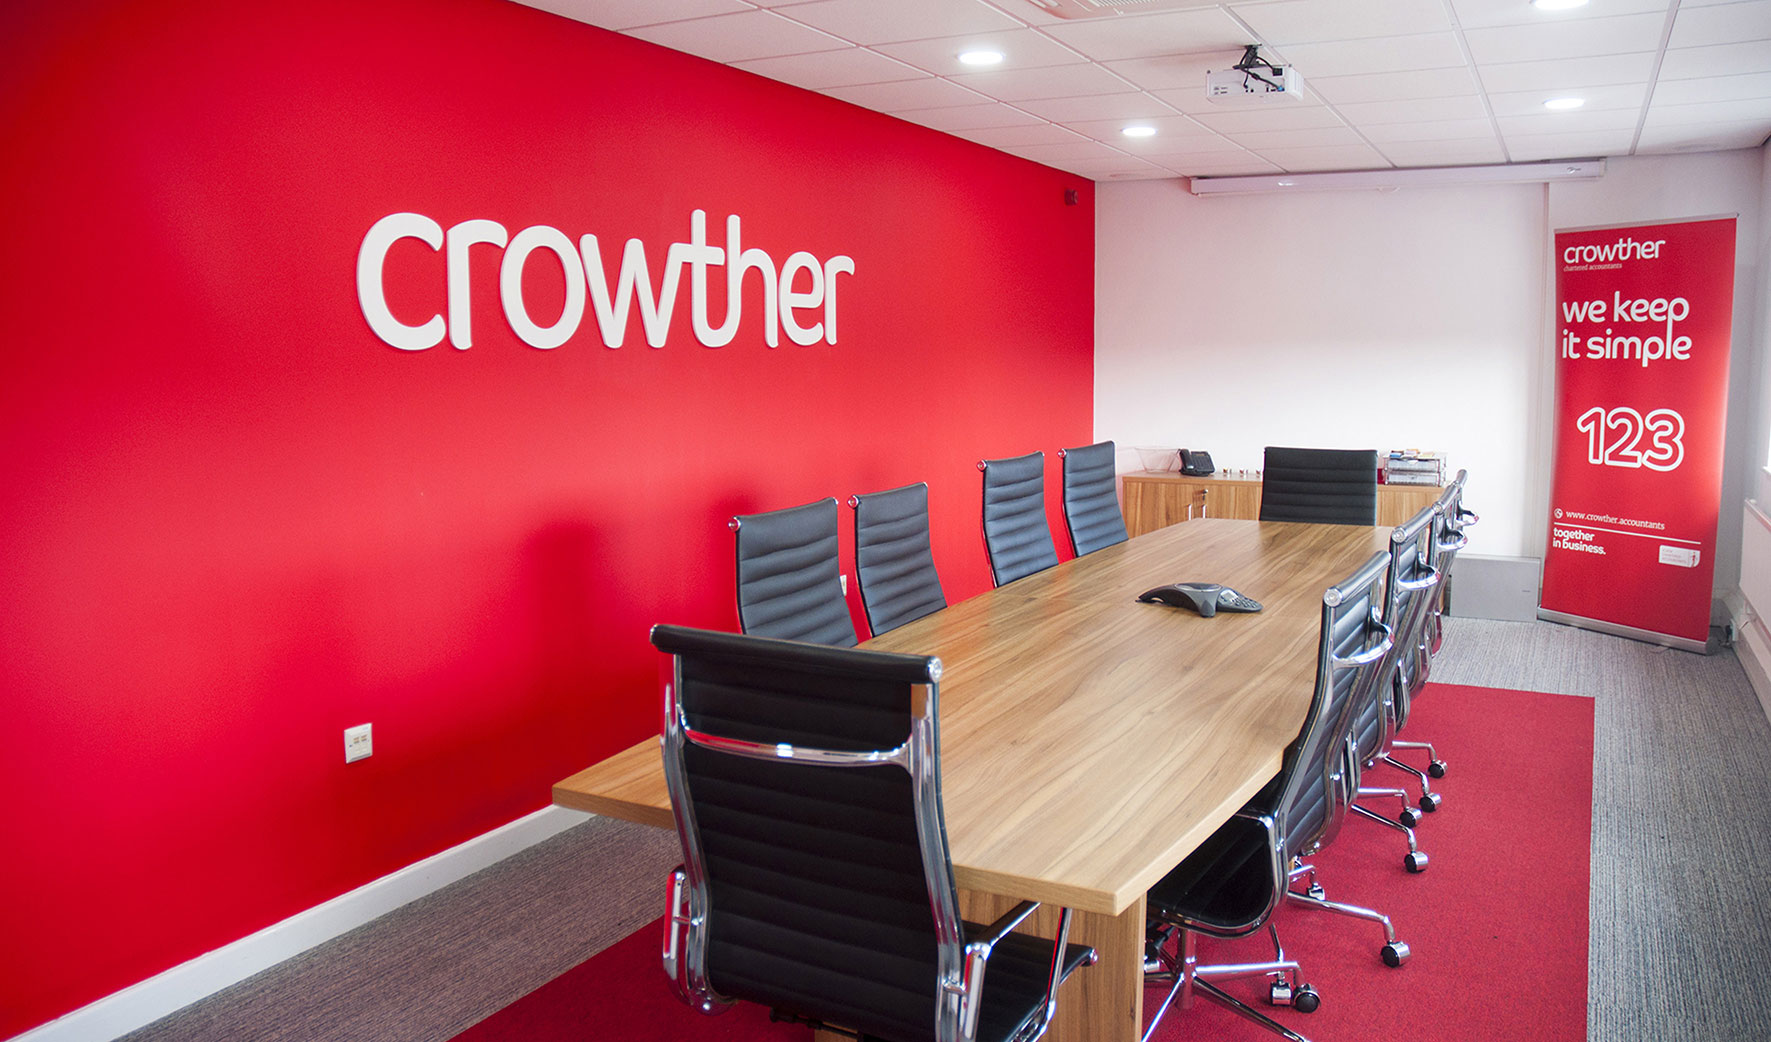 Crowther Chartered Accountants